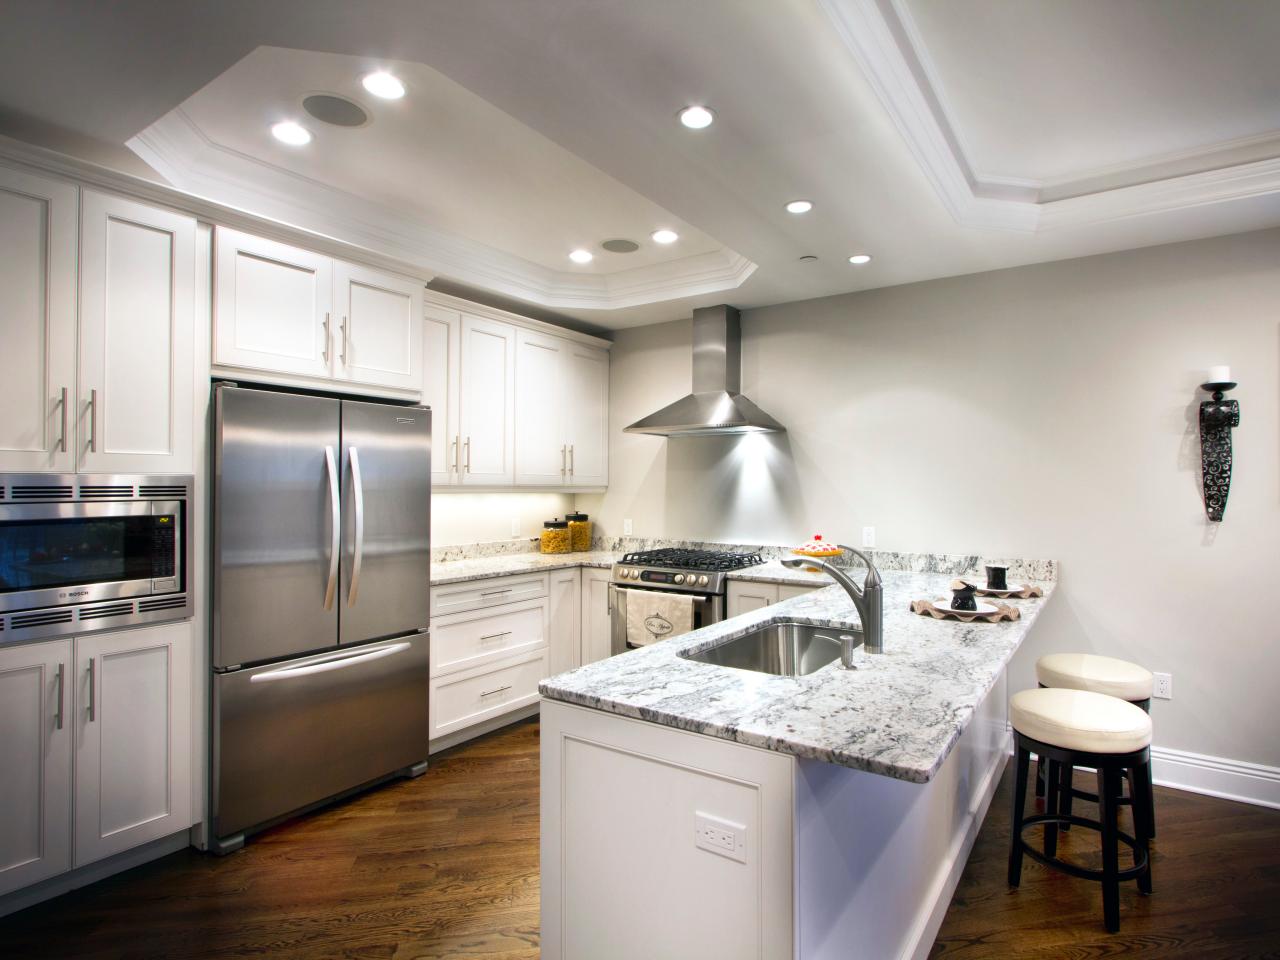 How To Select Appliances To Match Your Kitchen Cabinets Cliqstudios